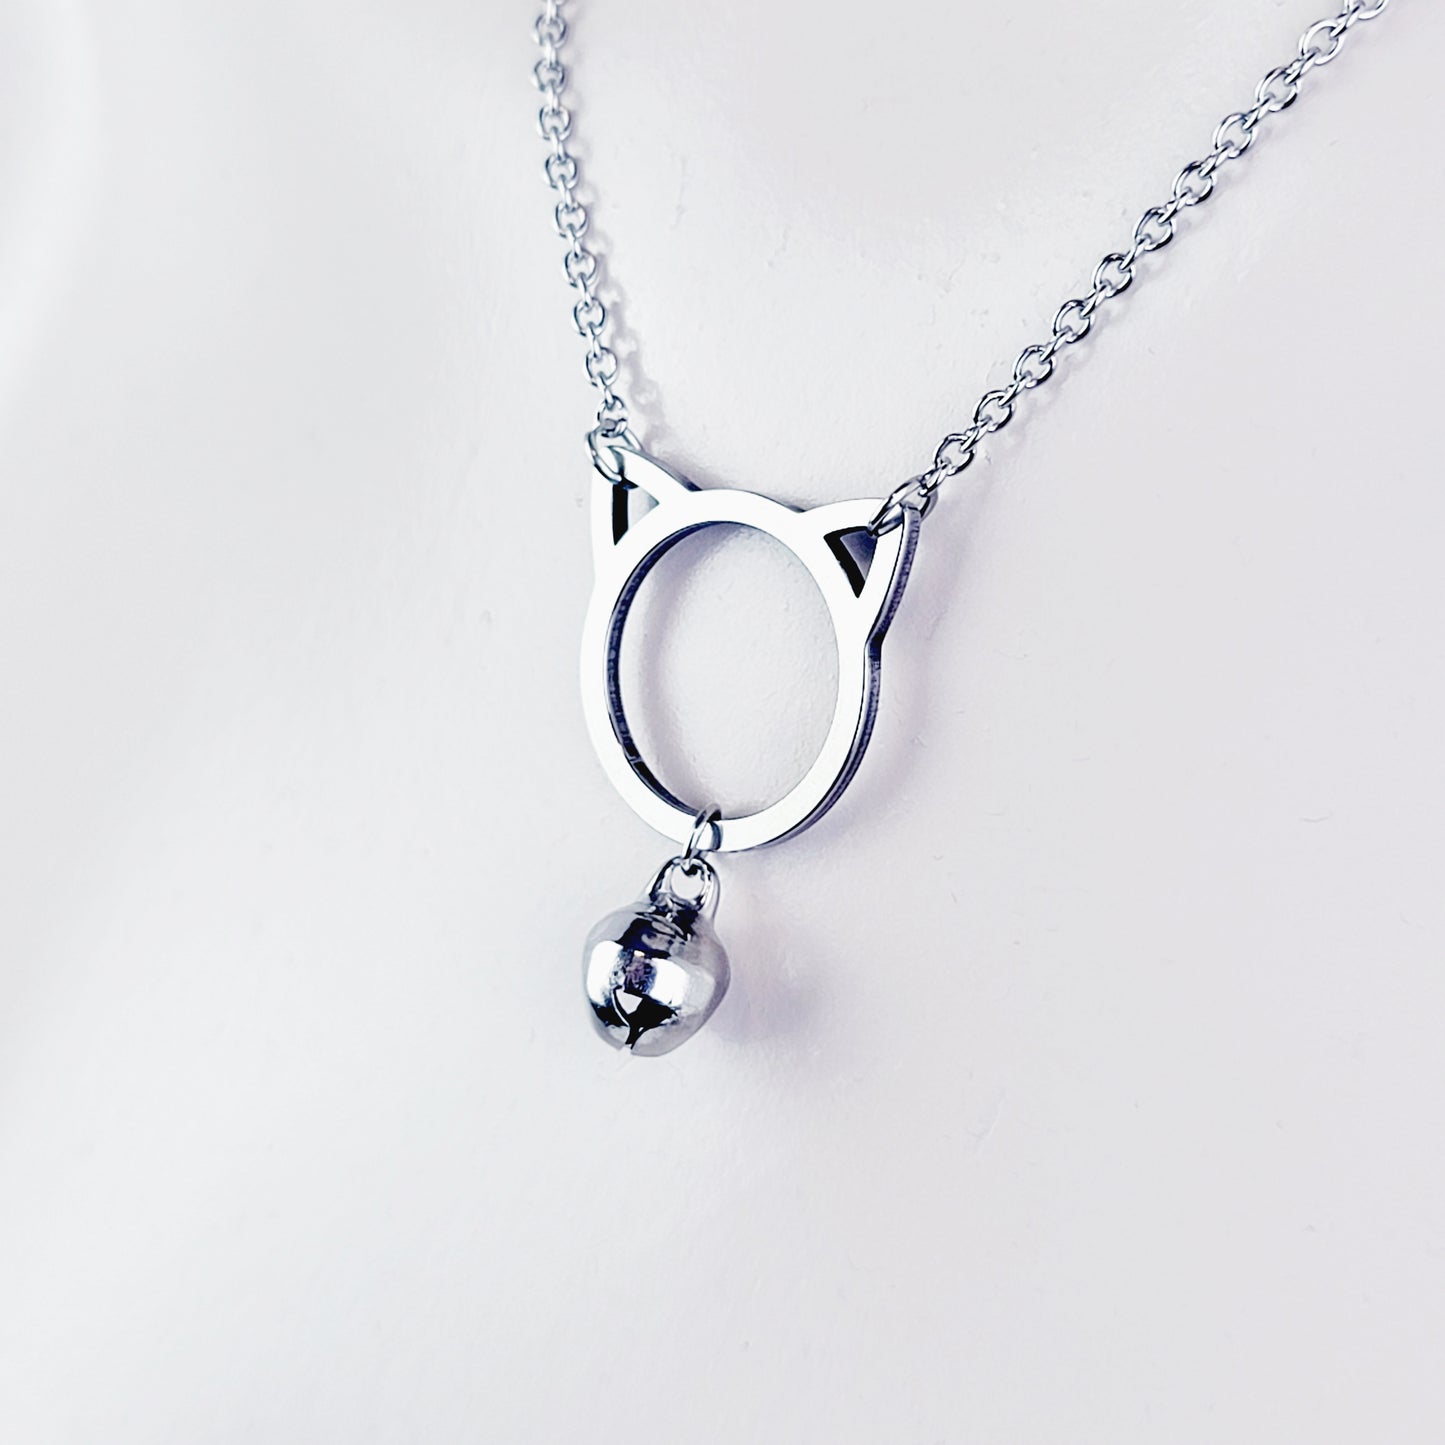 Discreet Day Collar. Stainless Steel Kitten with Bell. BDSM